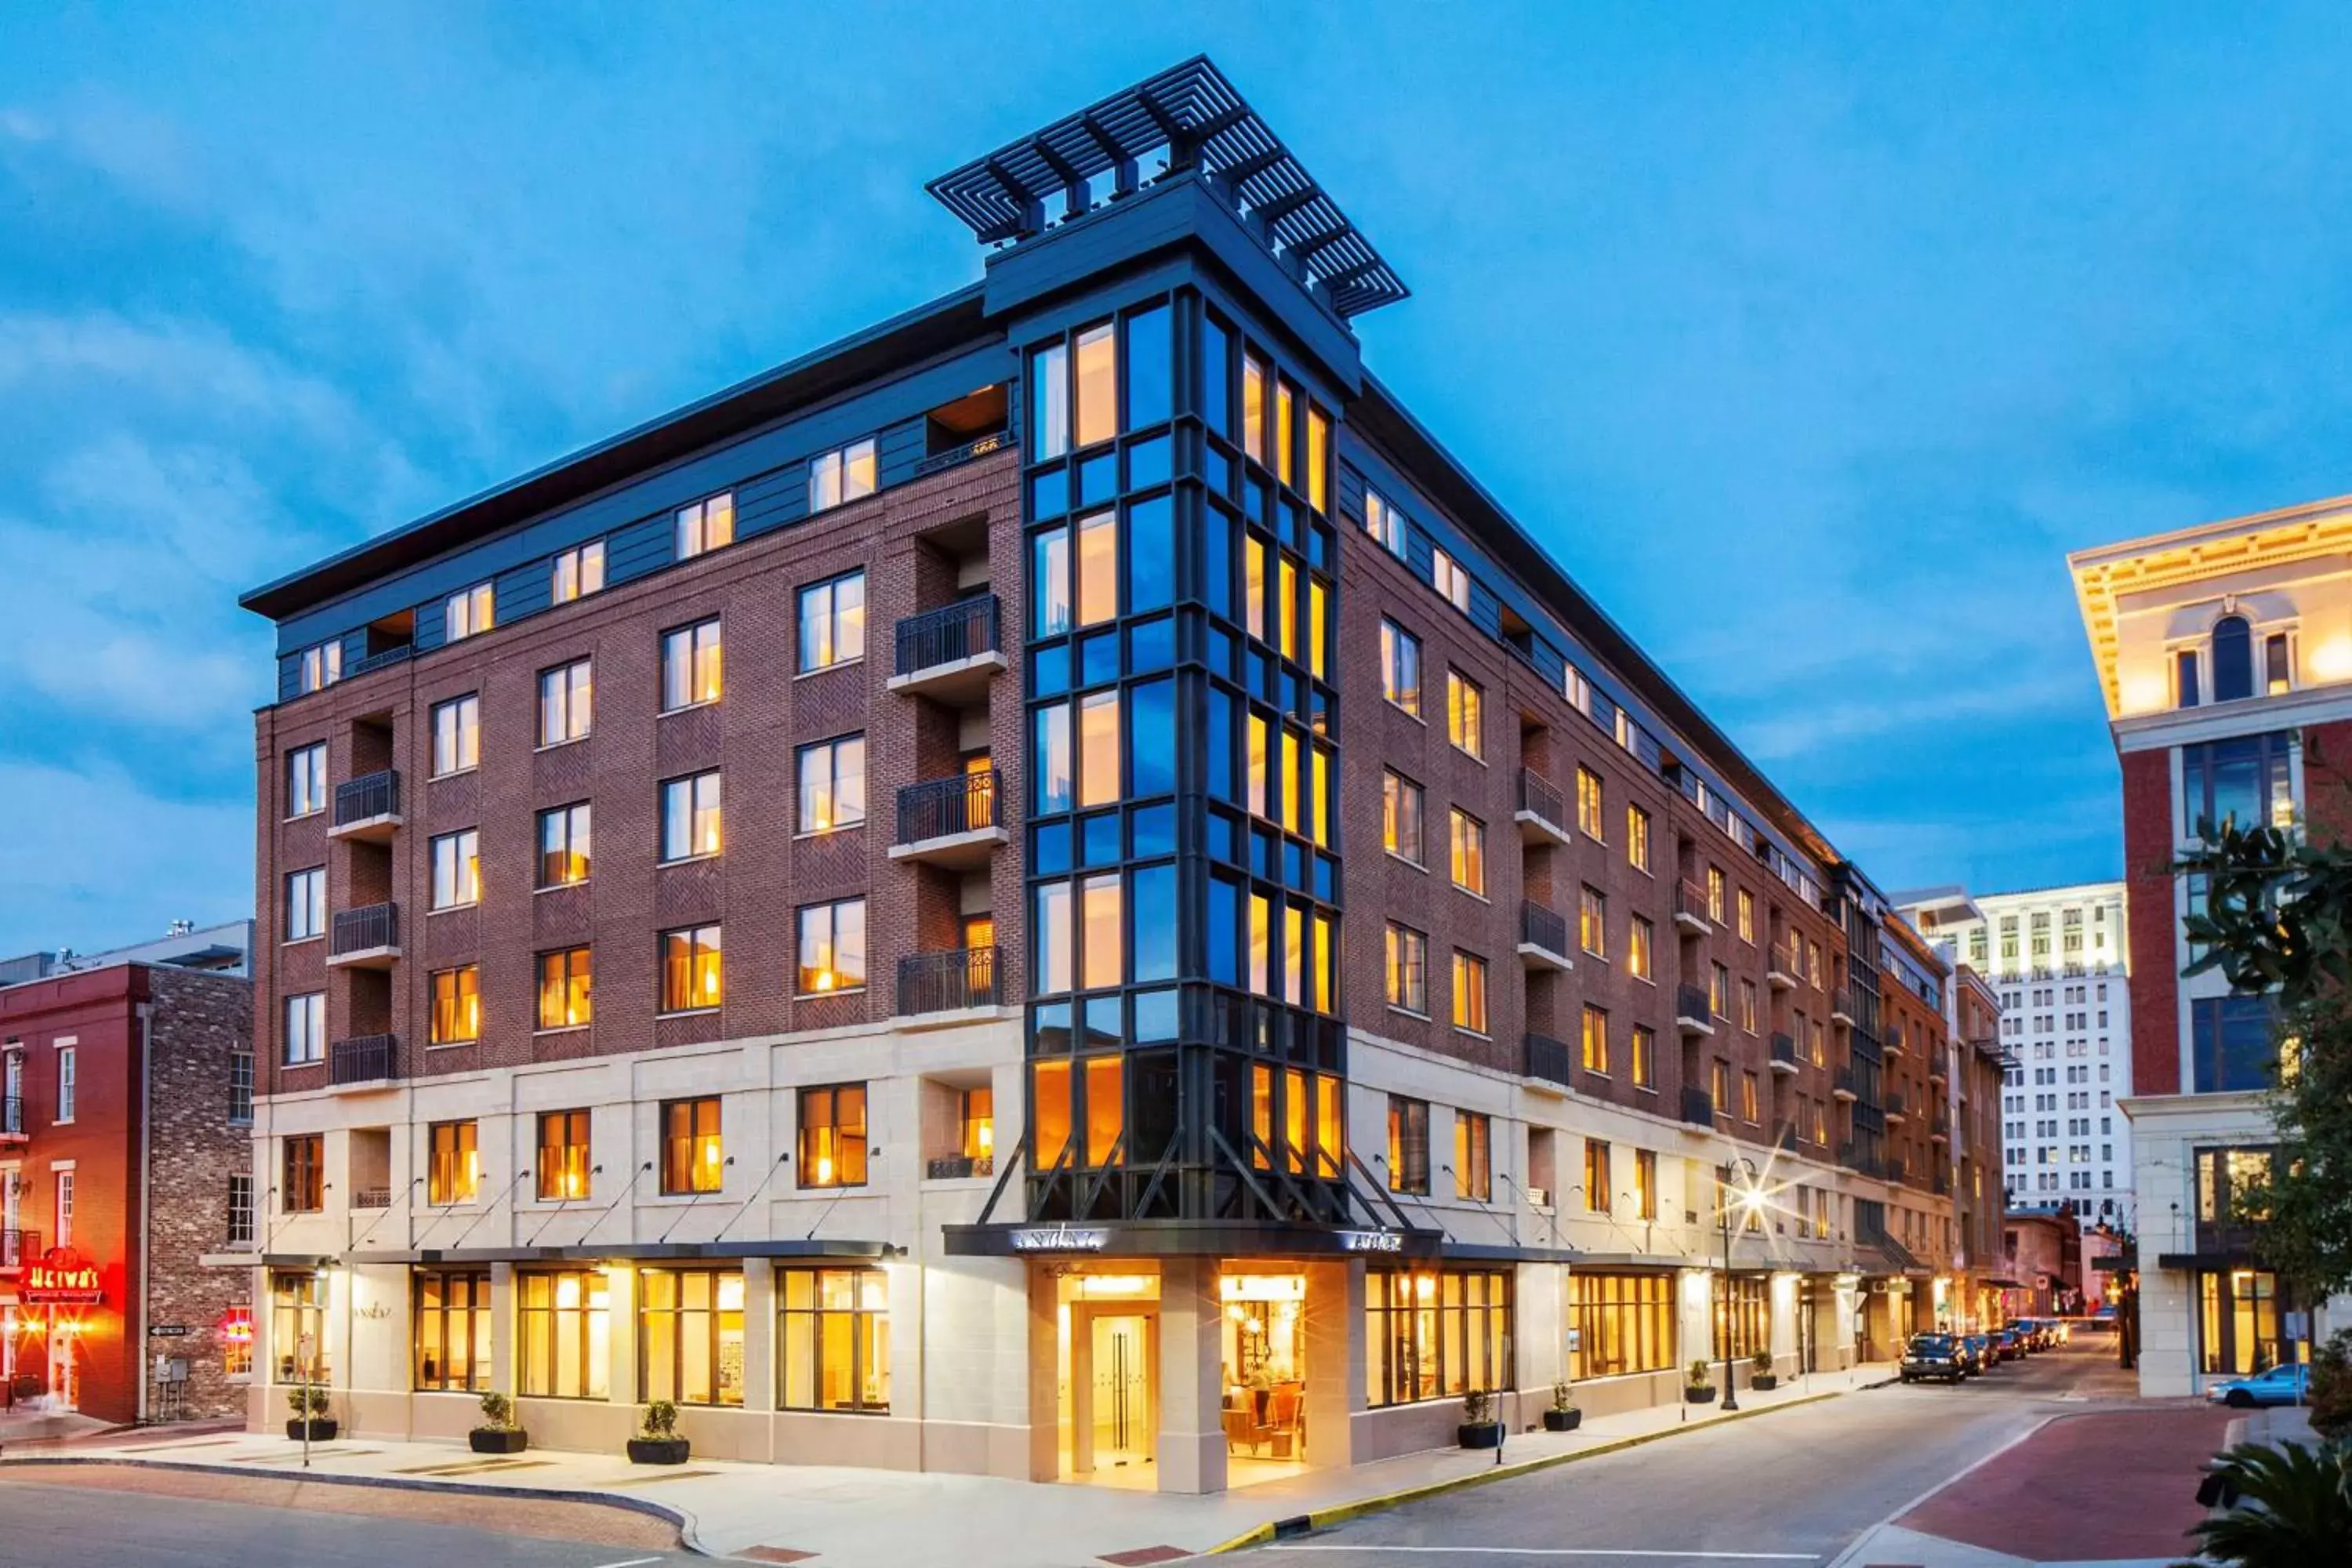 Property building in Andaz Savannah - A Concept by Hyatt